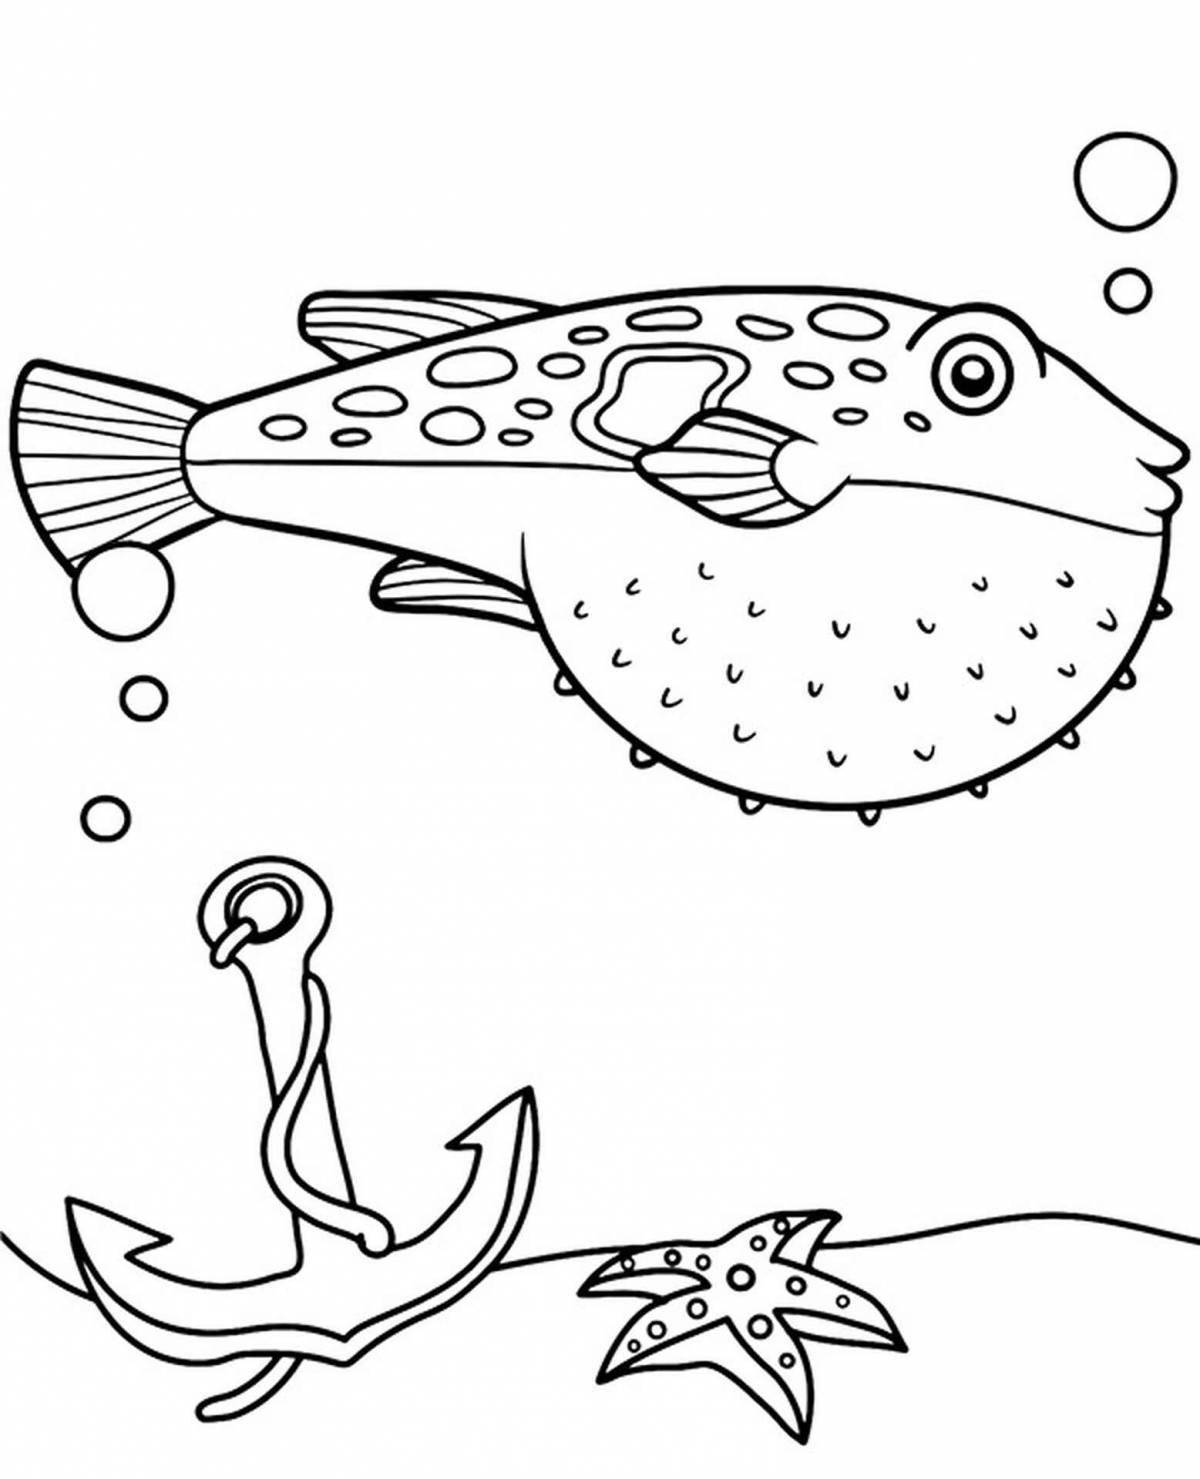 Glitter ball fish coloring page